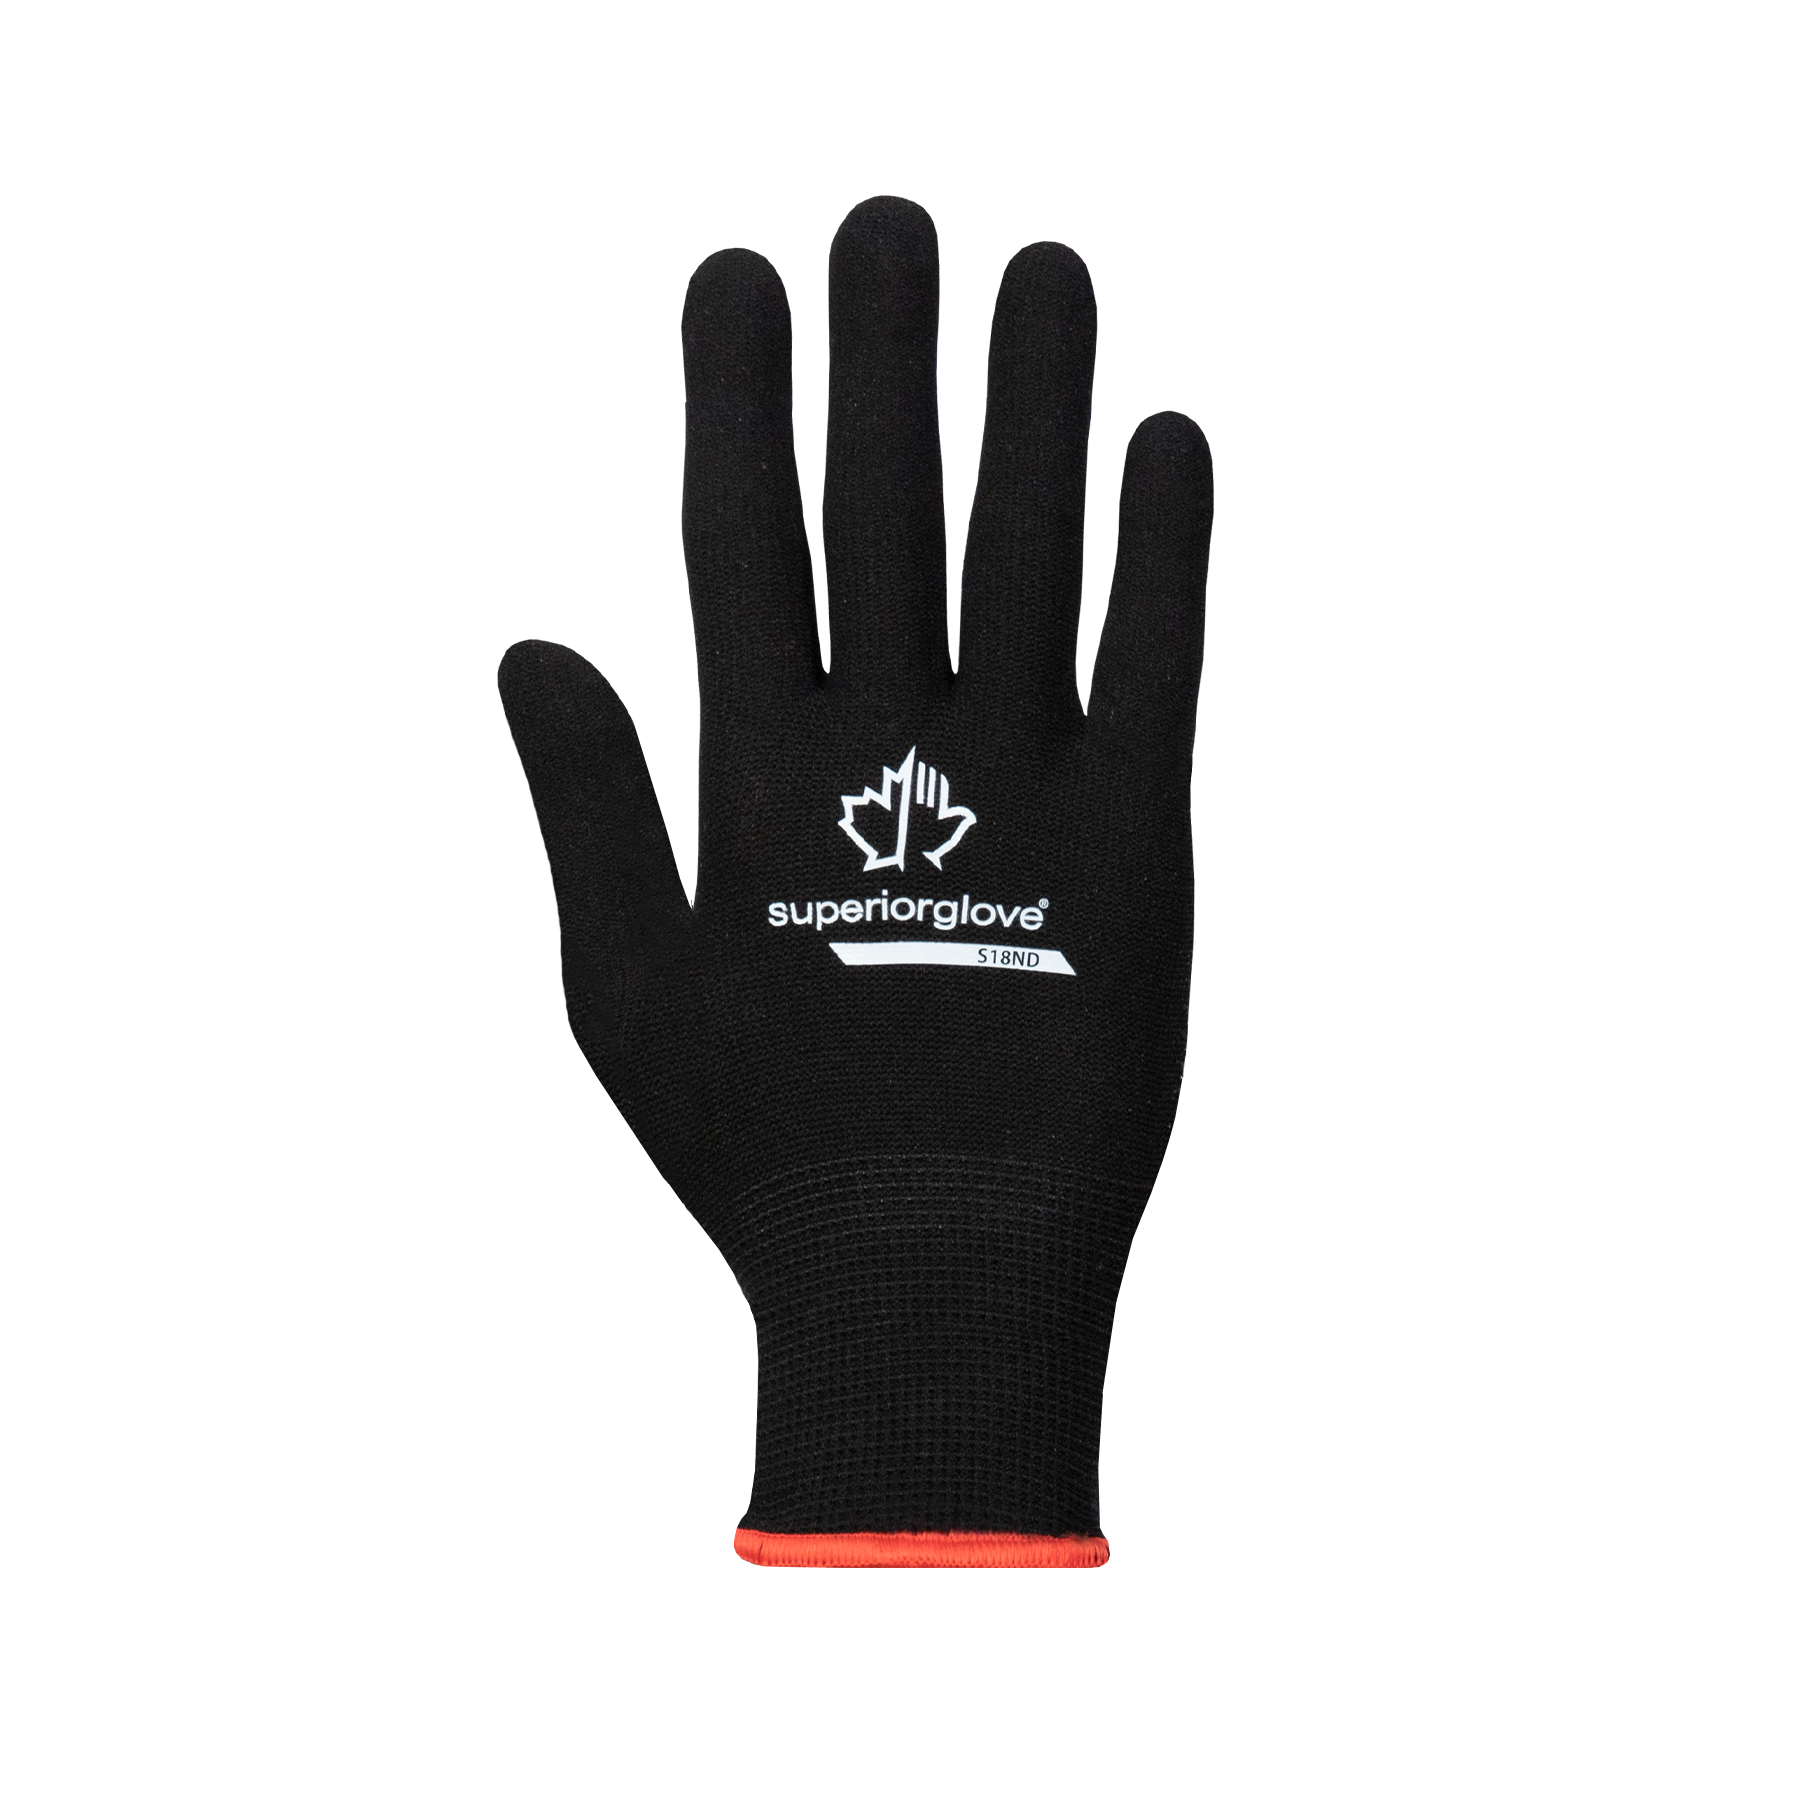 #S18ND Superior Glove® Dexterity® 18-gauge Seamless Knit Nylon Work Gloves with Dotted Palms